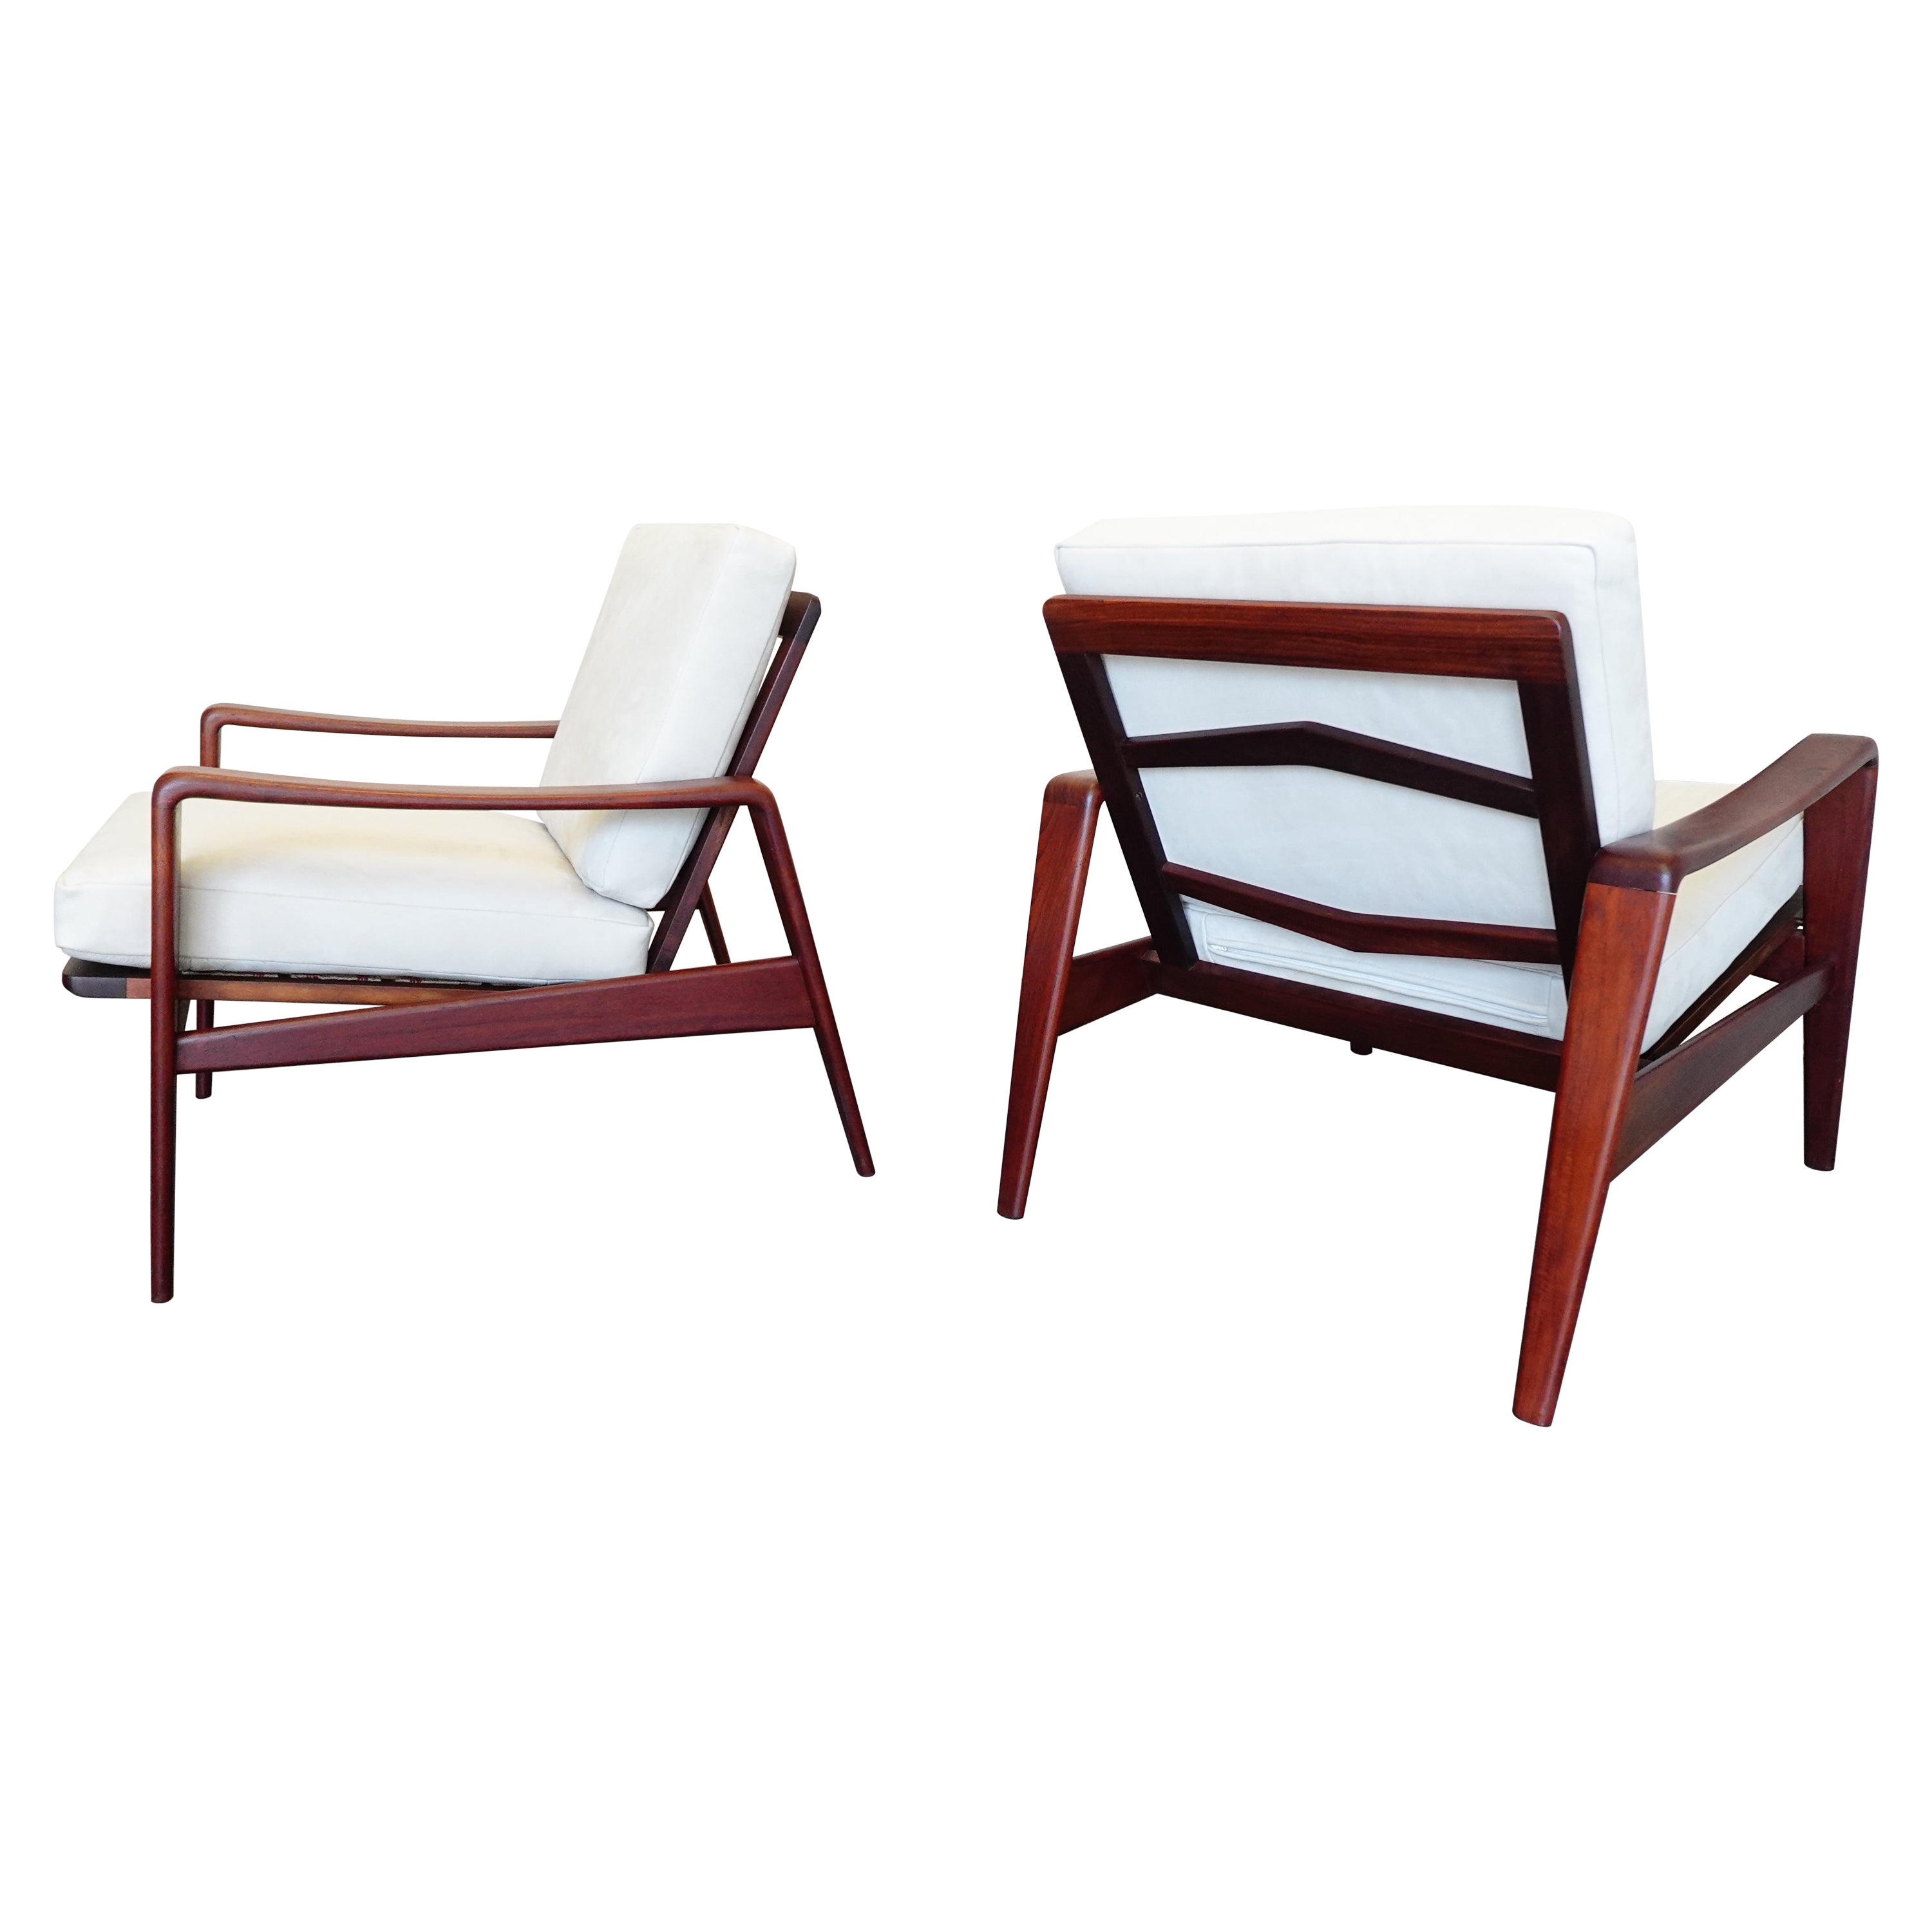 Pair of Arne Wahl Iverson Lounge Chairs for Komfort in Teak & Leather, 1960 For Sale